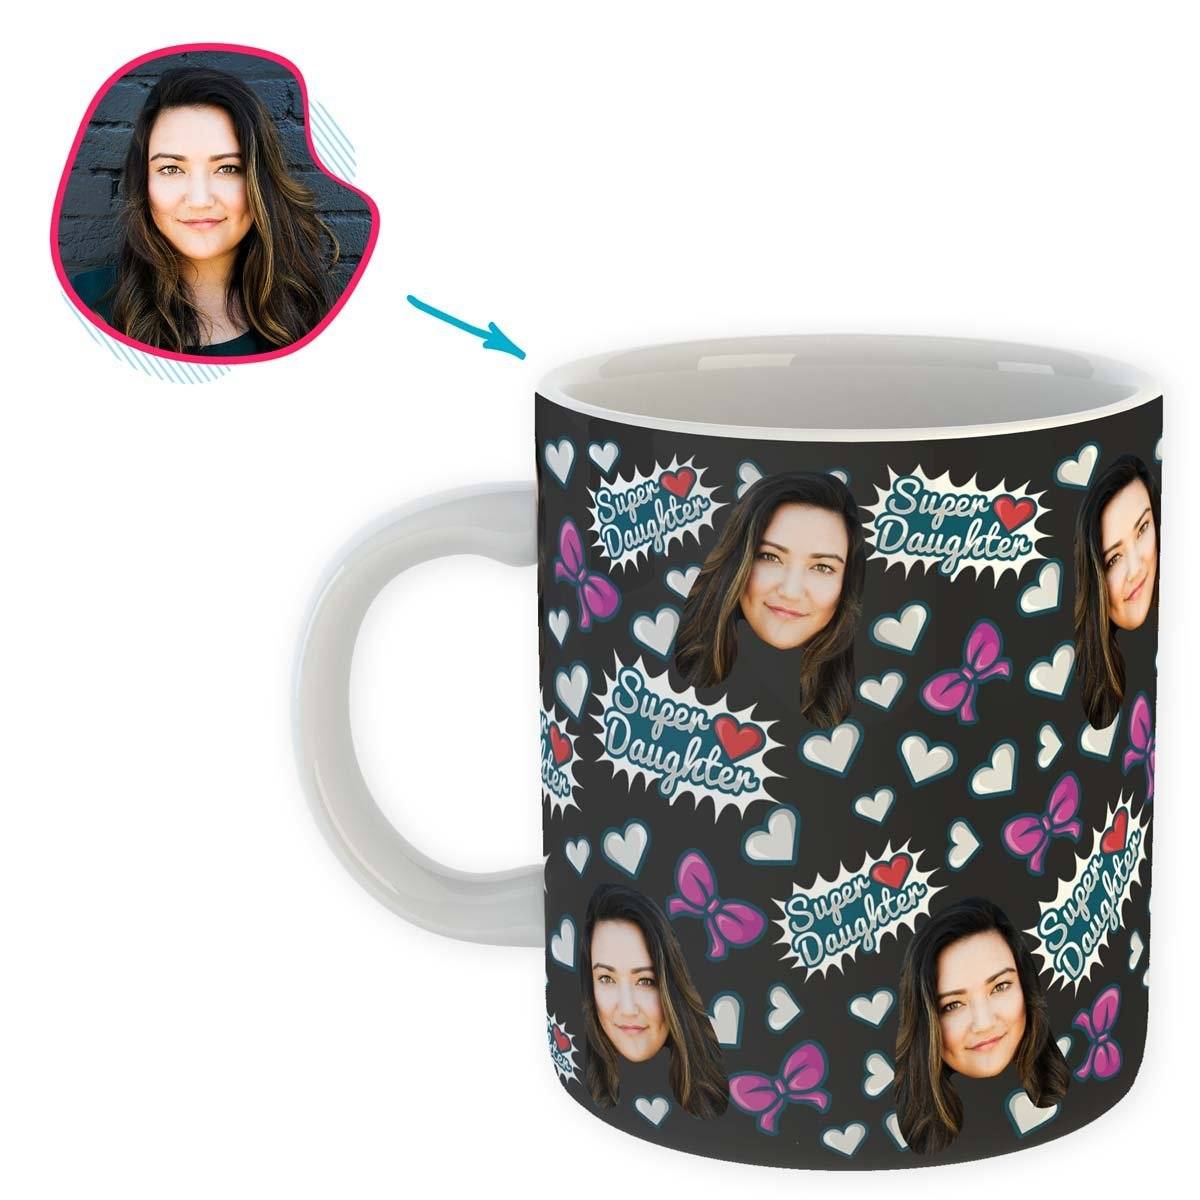 dark Super Daughter mug personalized with photo of face printed on it